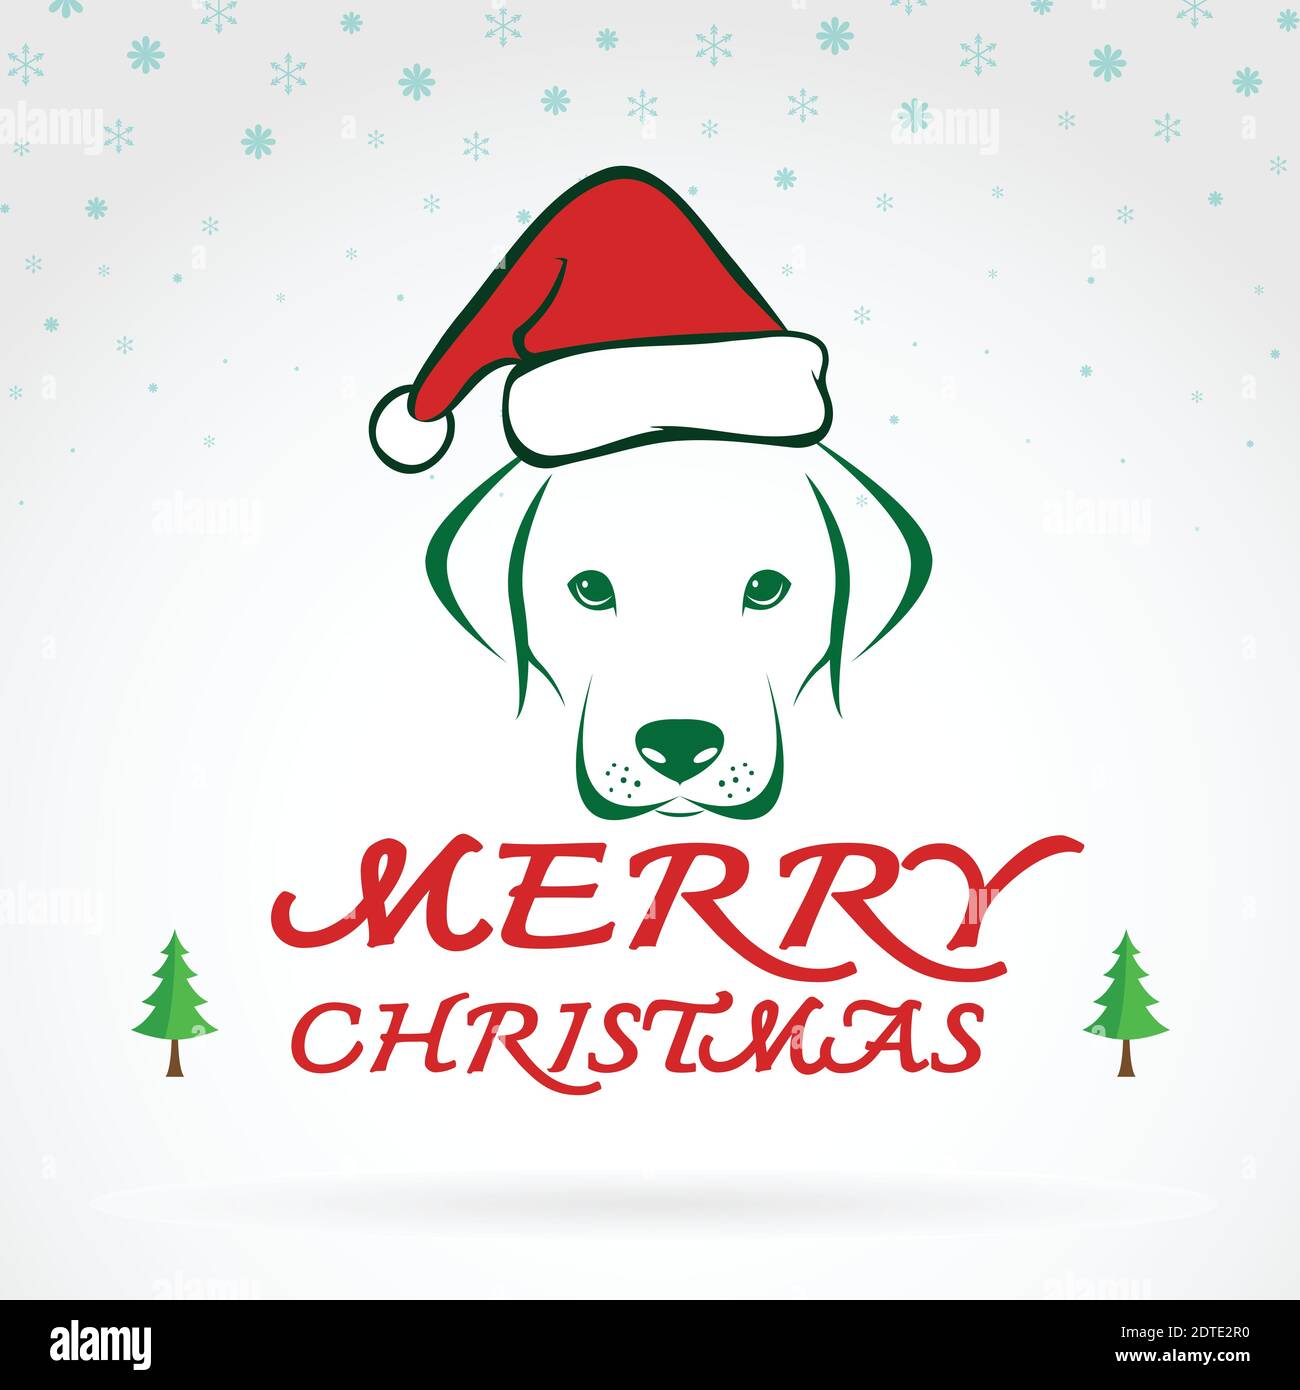 Vector image of an dog and santa hats on white background.  Merry Christmas lettering Stock Vector